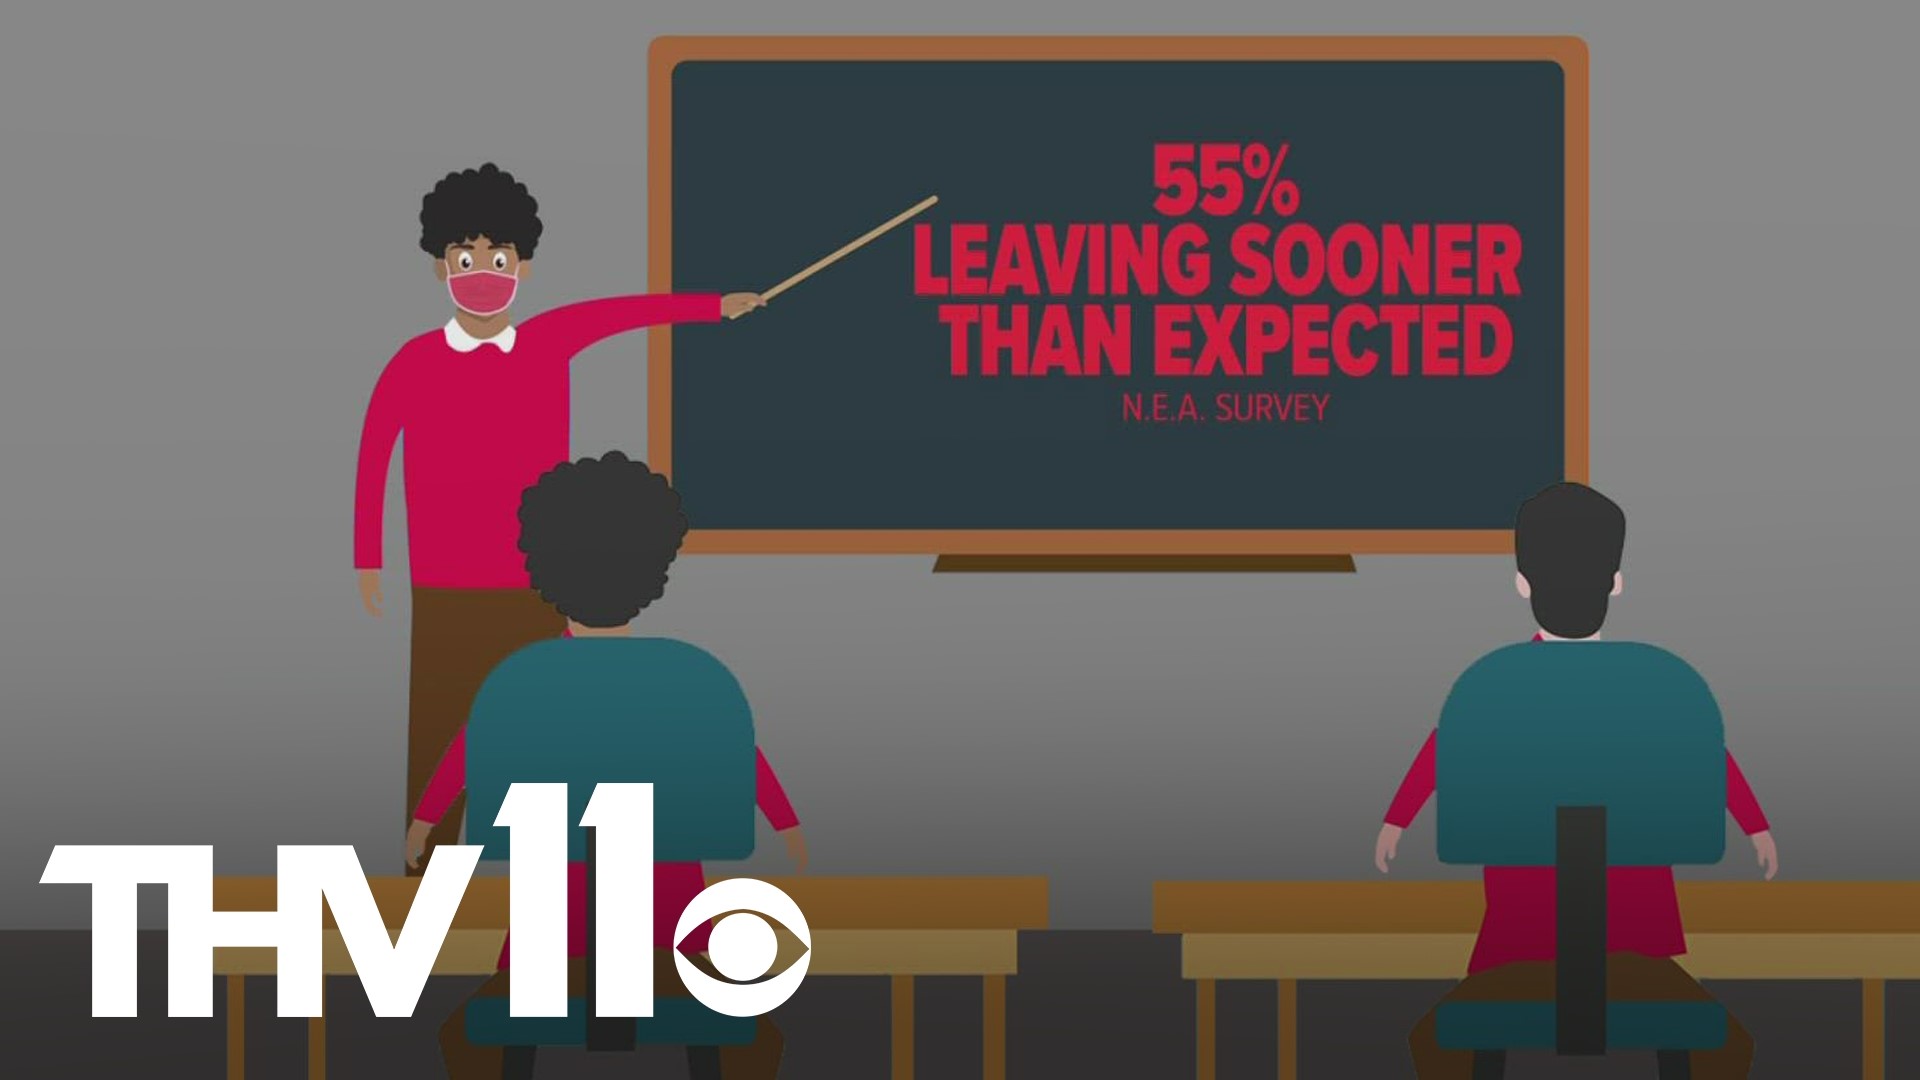 For the last two years we've heard more and more about teachers leaving to pursue other careers, but now there are fears we're heading toward a crisis.